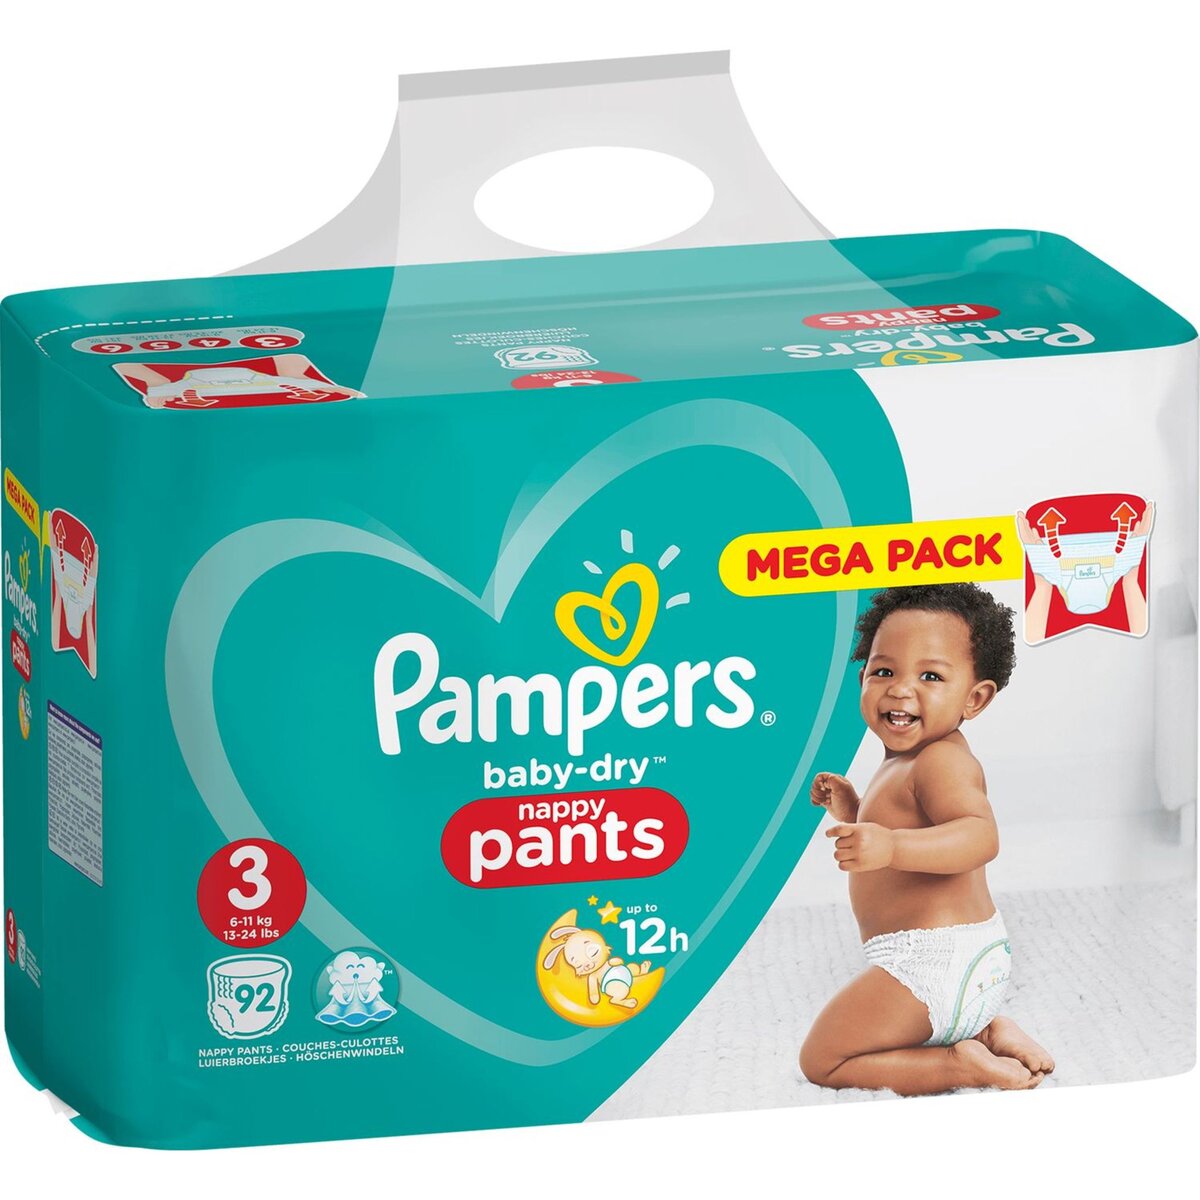 Pampers Couches-Culottes Baby-Dry Pants Taille 7